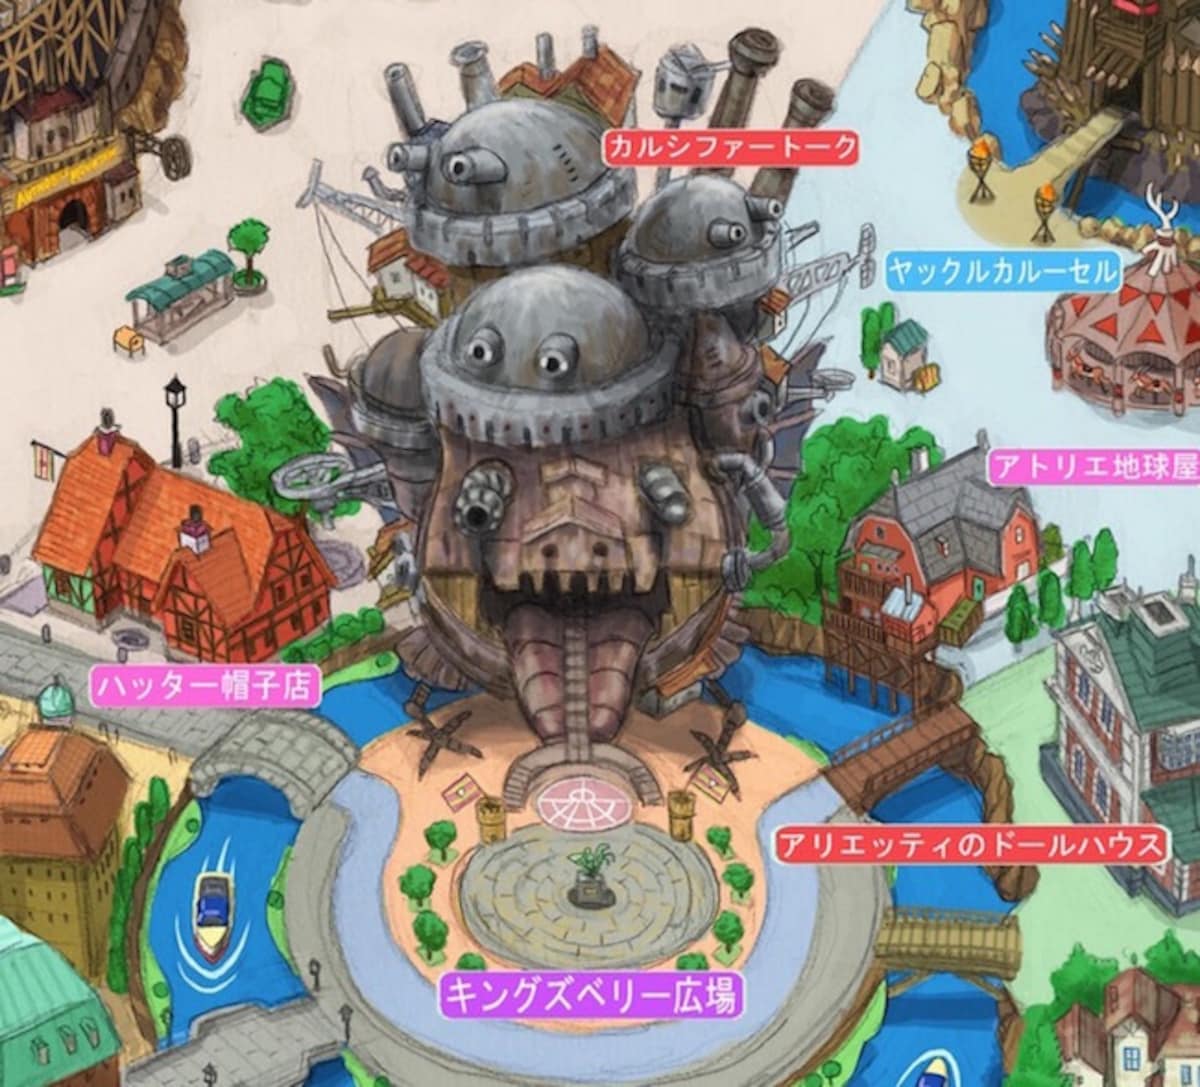 A Ghibli Land We'd Love to See in Real Life | All About Japan